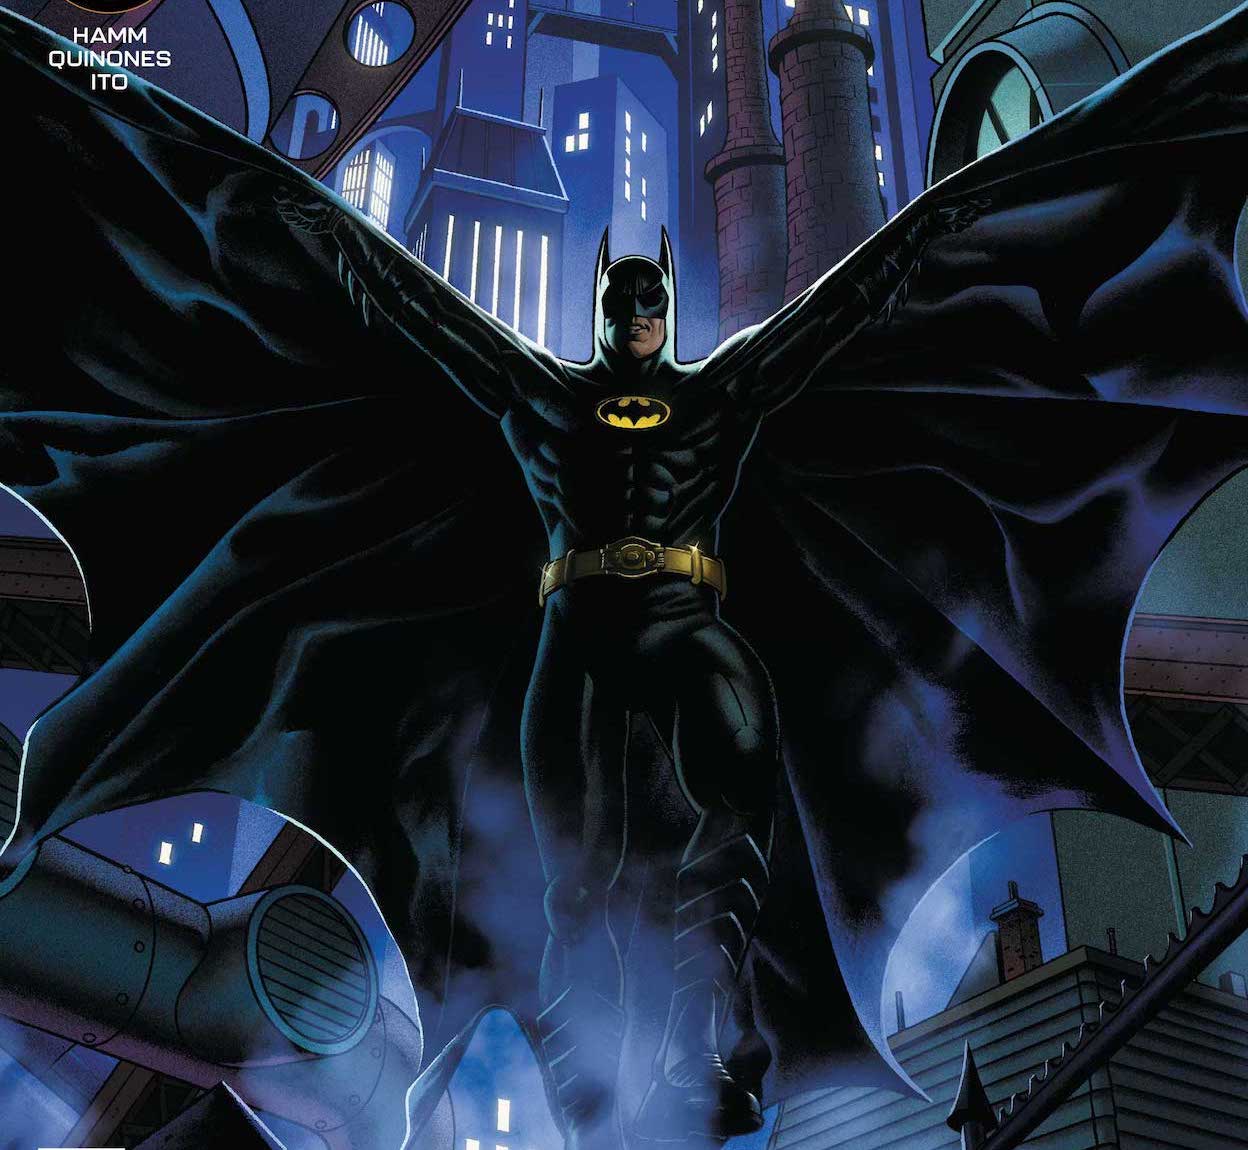 DC Comics First Look: Batman ’89 #1 and covers for #2 and #3